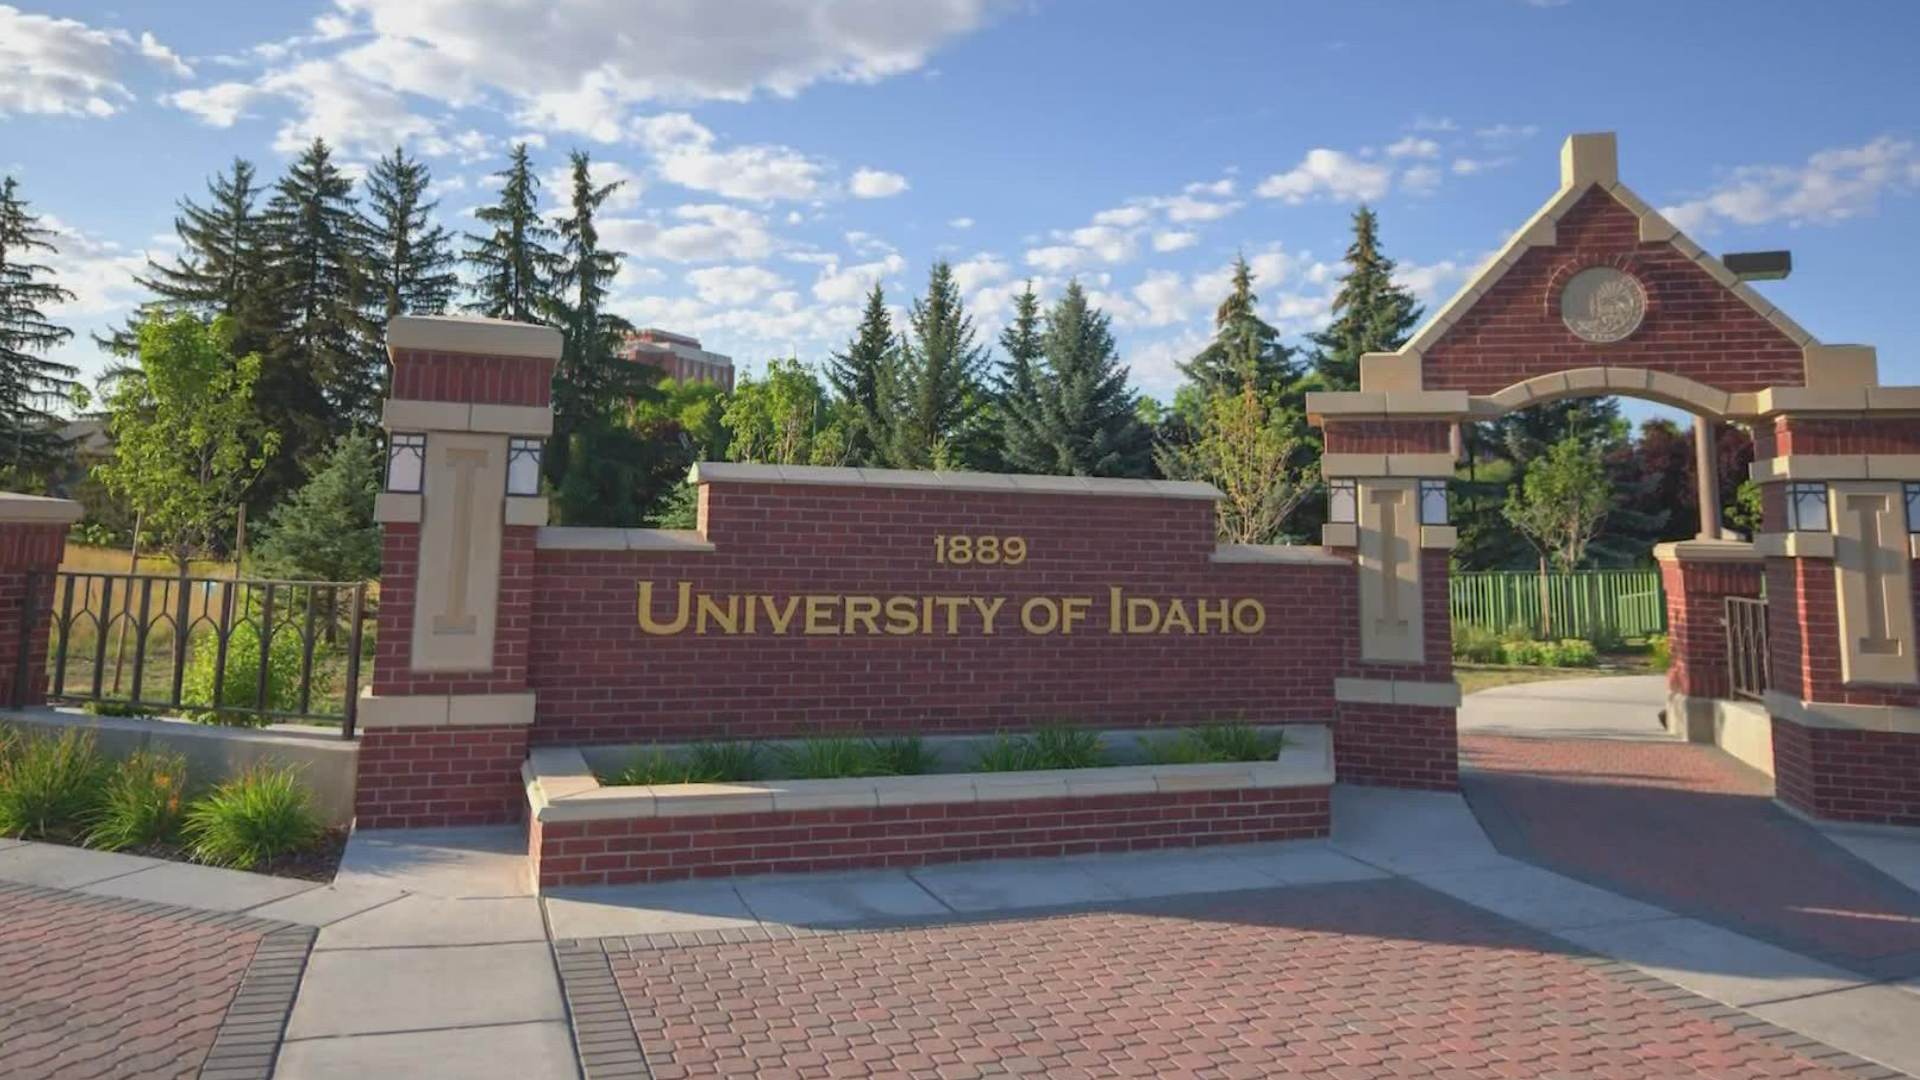 The University of Idaho is urging staff members to “remain neutral” in discussions about abortion and avoid promoting contraception in response to state laws.